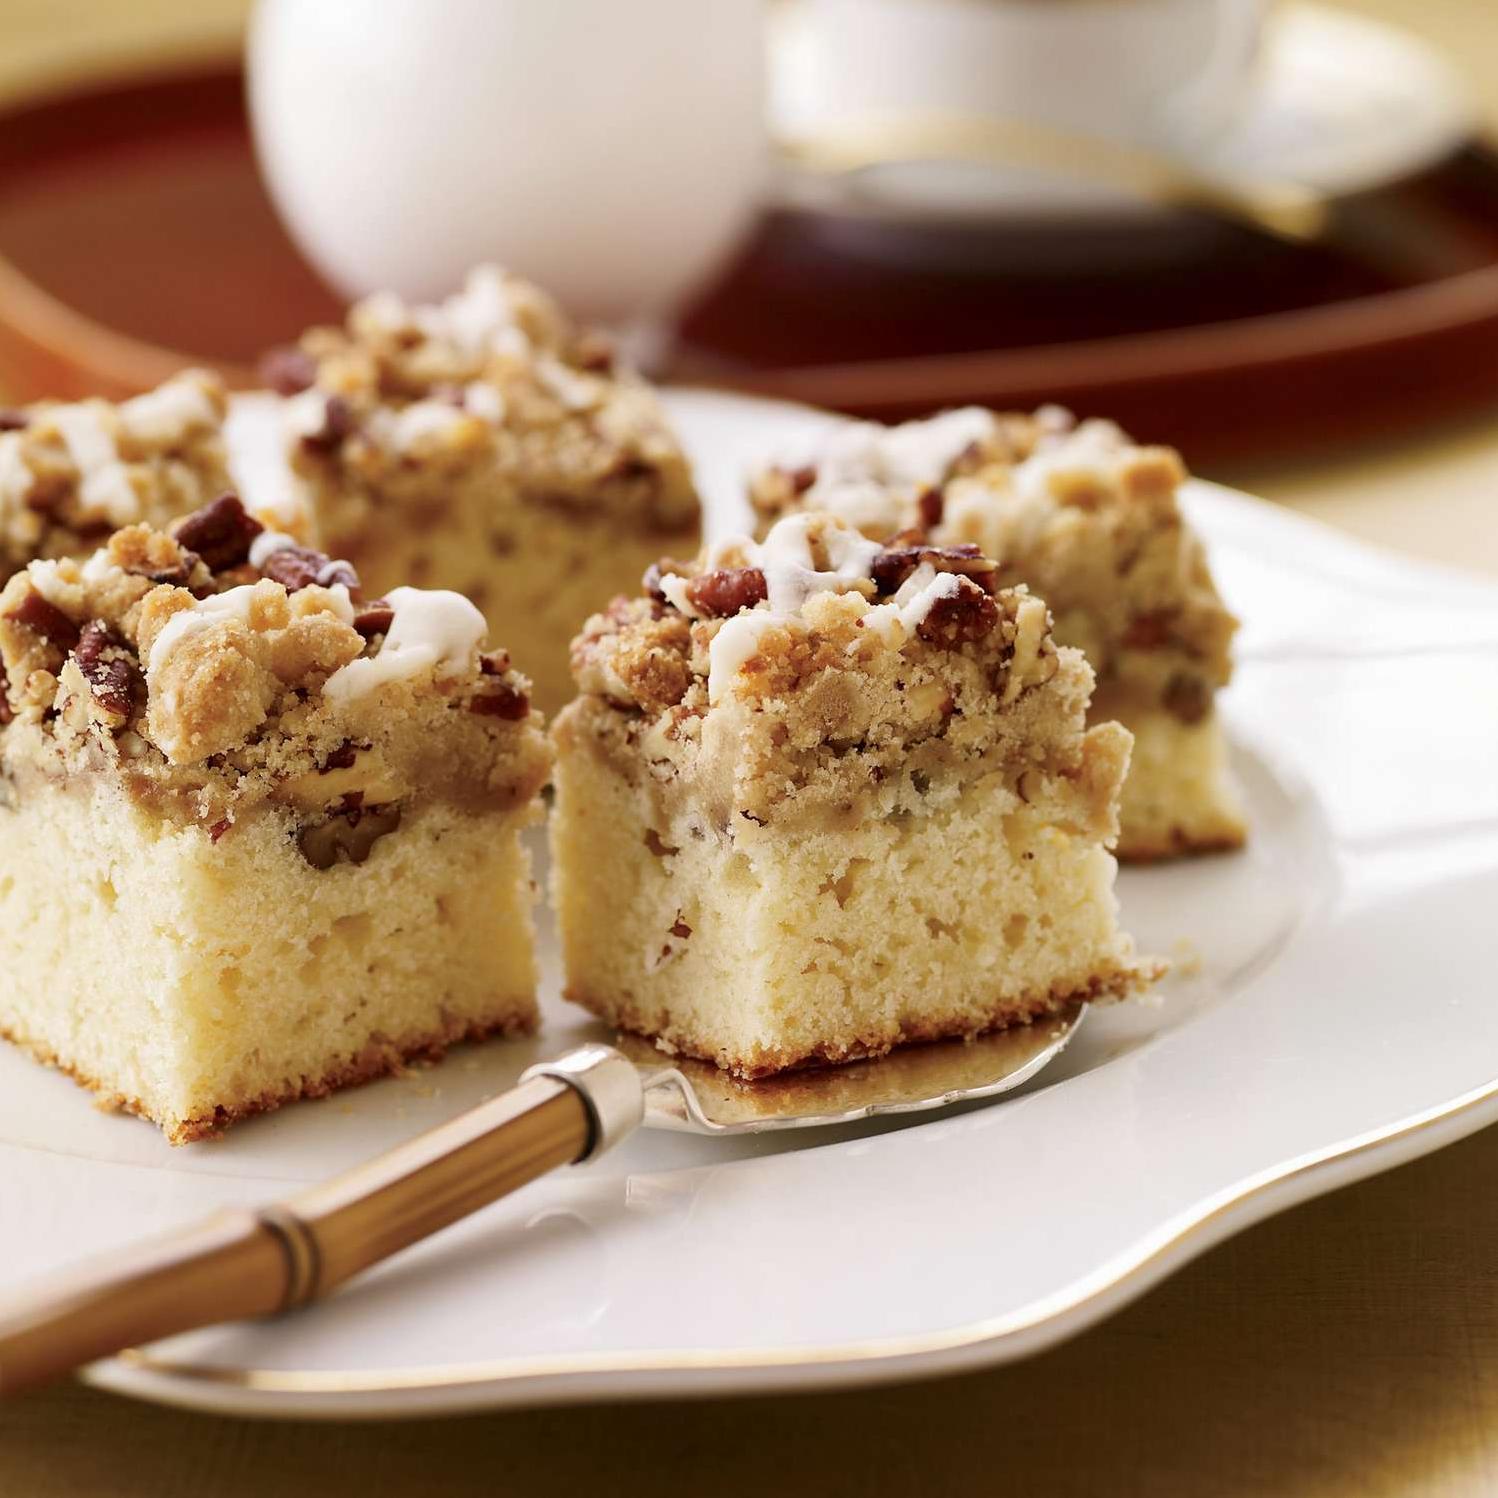  Your house will smell amazing while this coffee cake bakes in the oven.